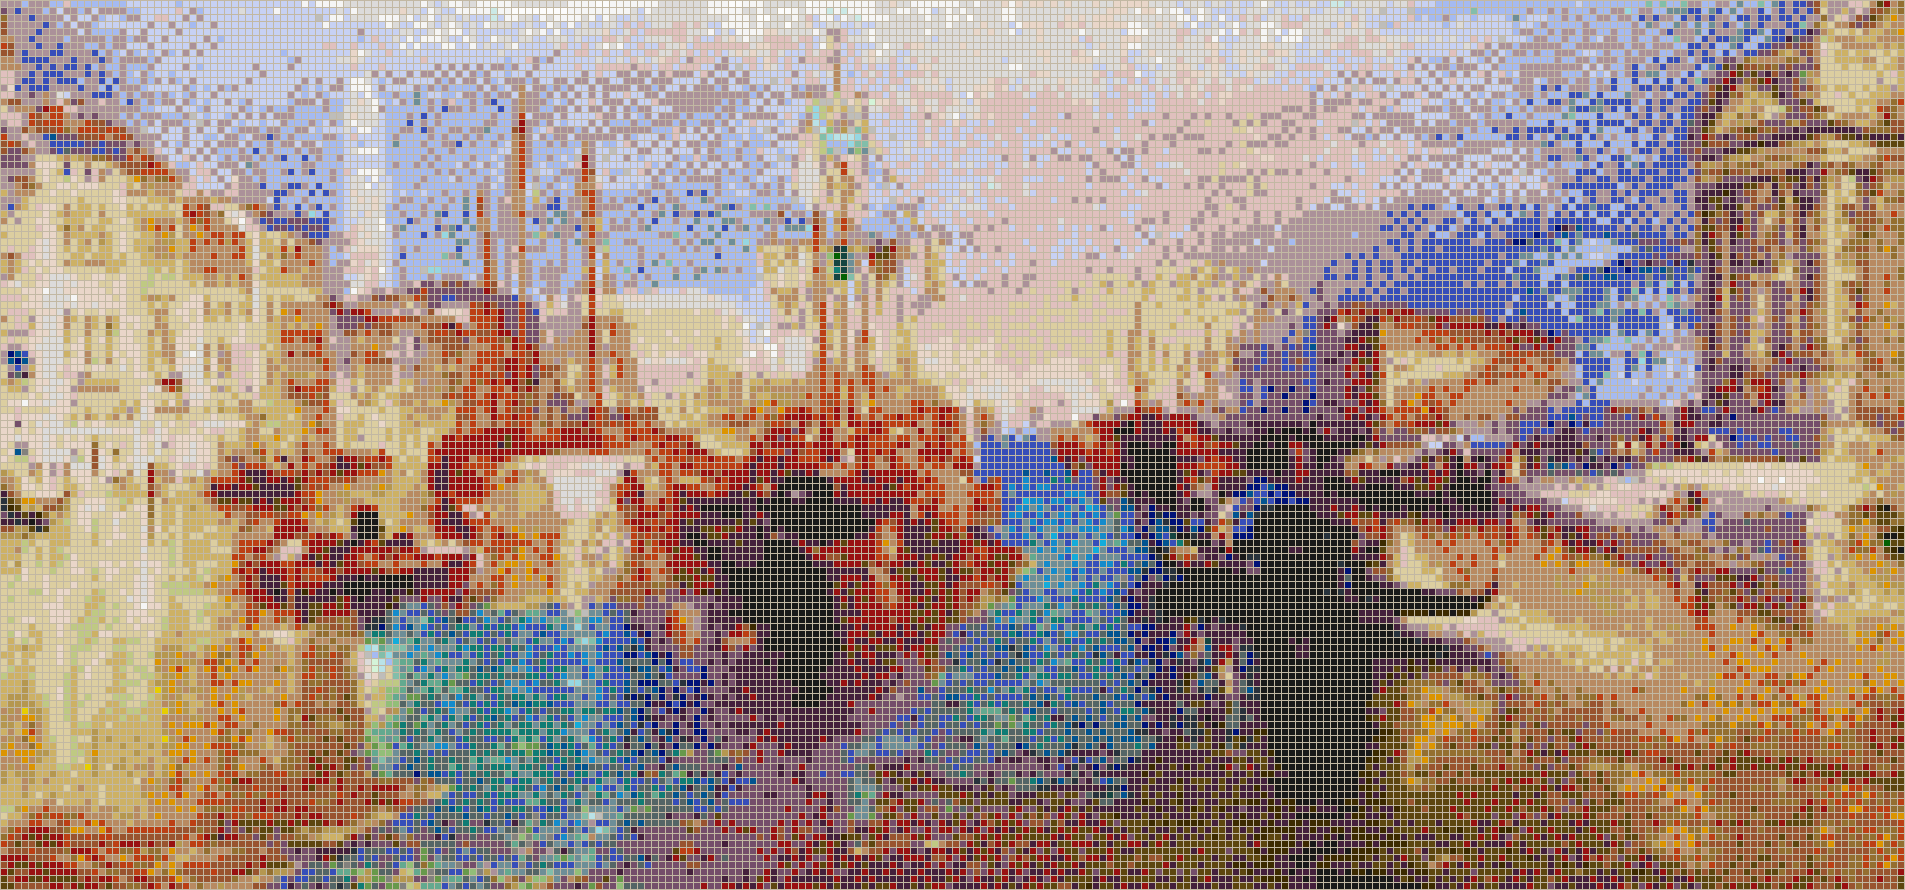 The Grand Canal, Venice (Turner) - Mosaic Tile Picture Art